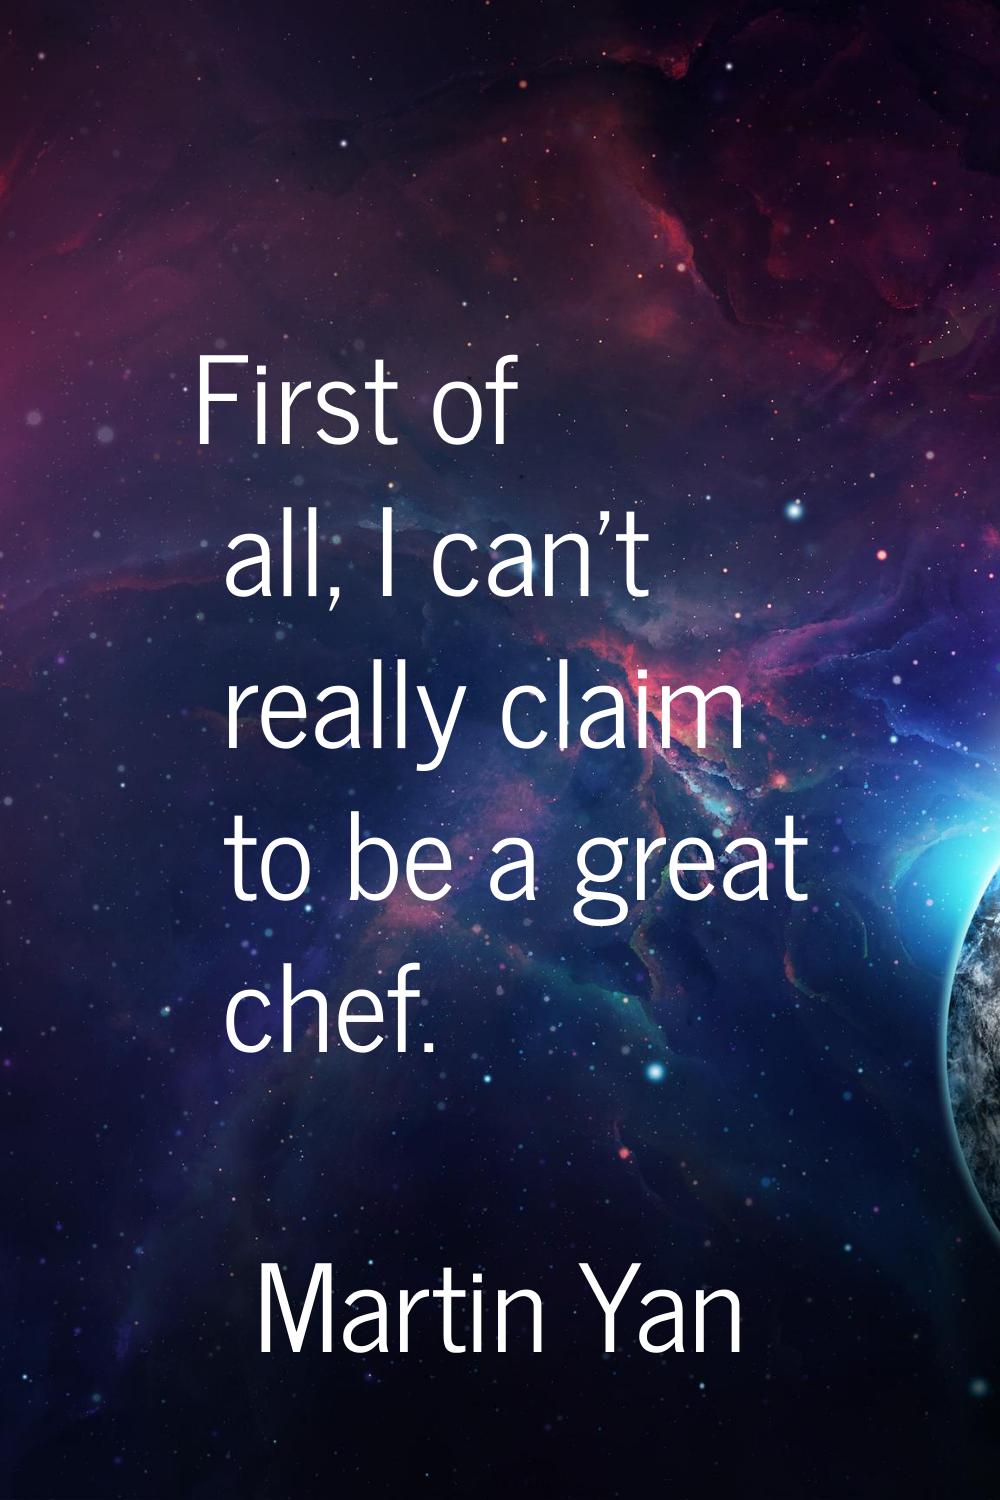 First of all, I can't really claim to be a great chef.